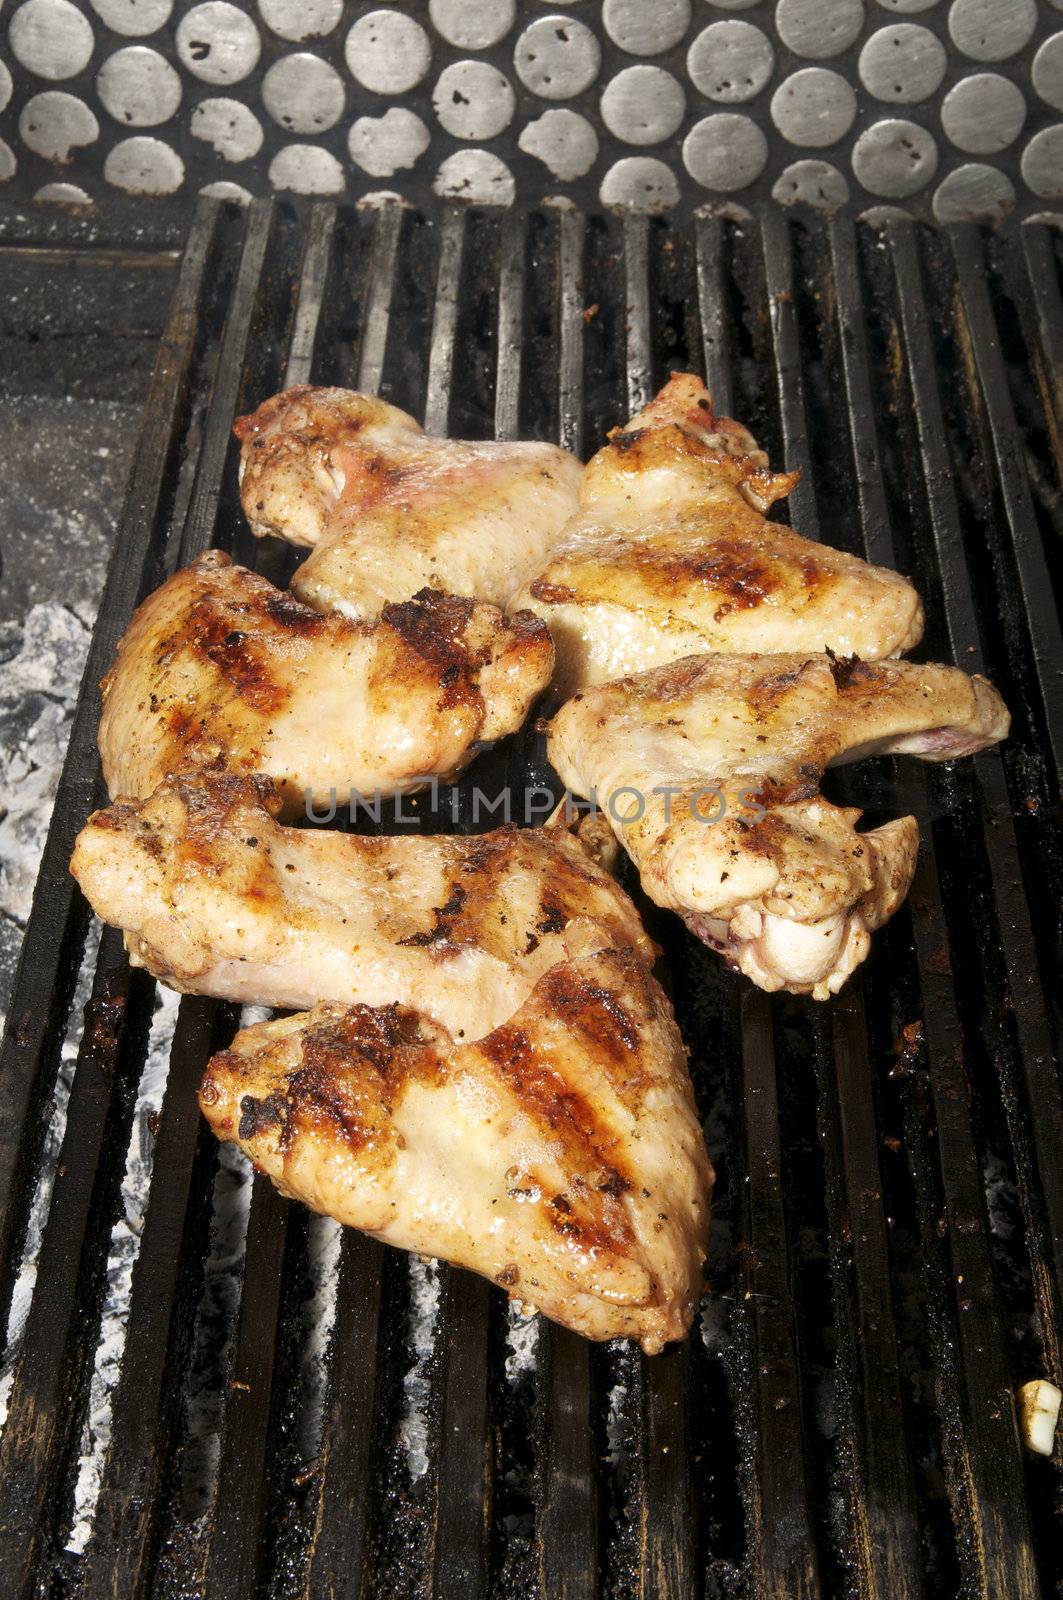 chicken wings on the grill by Lester120